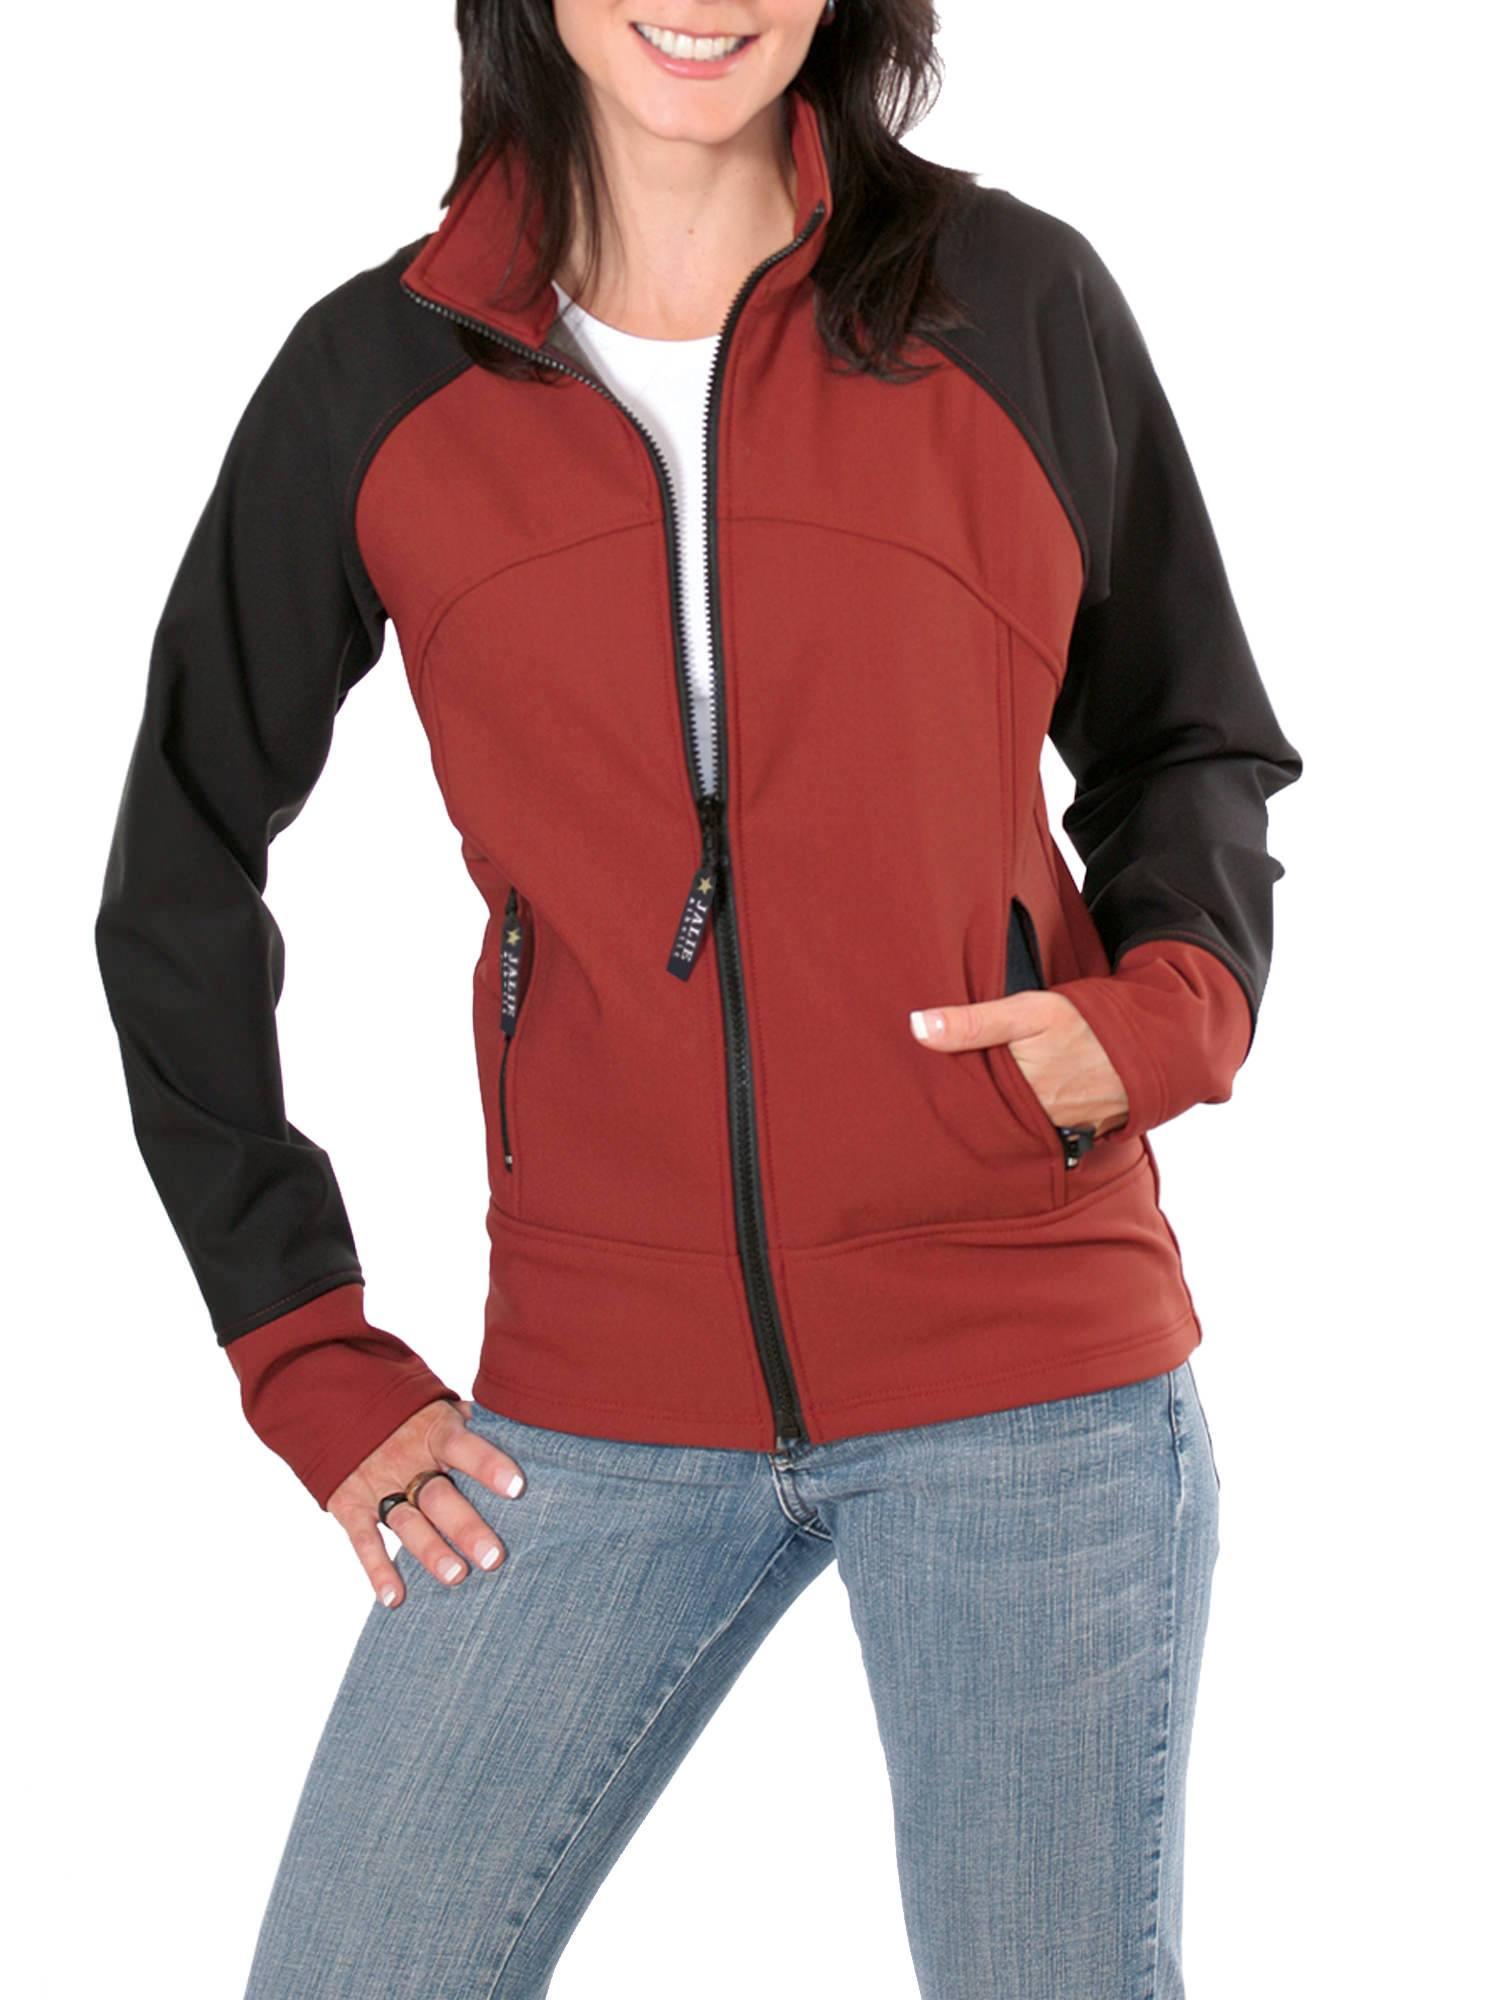 Jalie 2679 - Softshell Jacket Pattern for Girls and Women